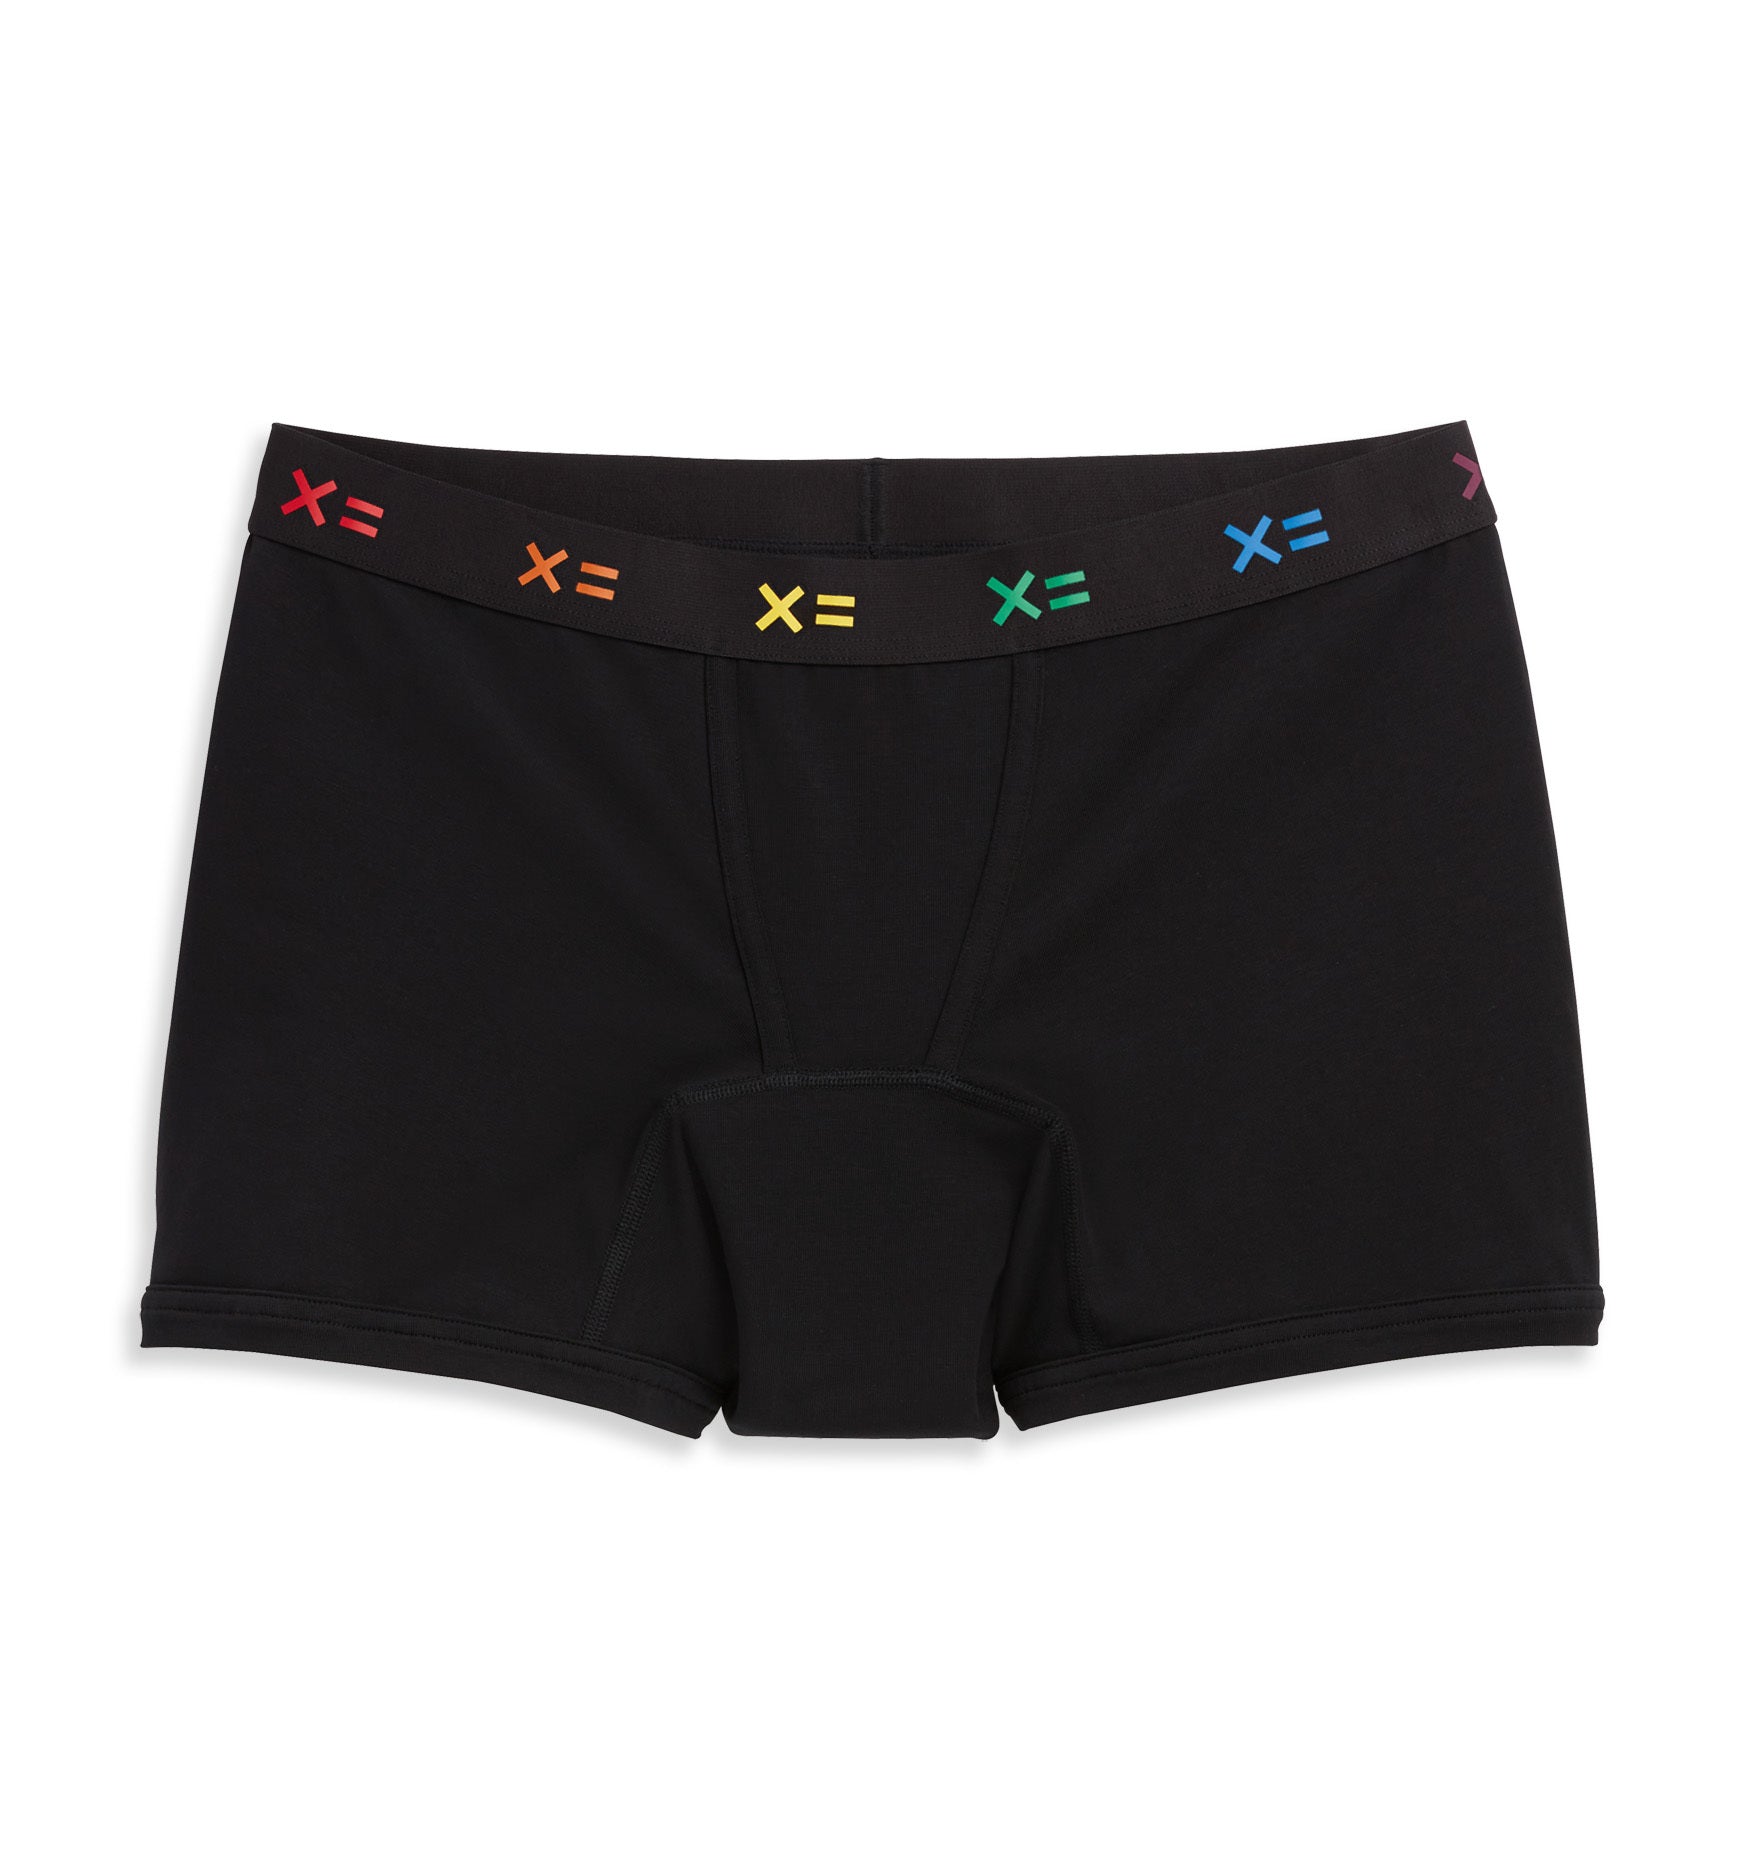 TomboyX First Line Period 9 Boxer Briefs 3-Pack - Black X